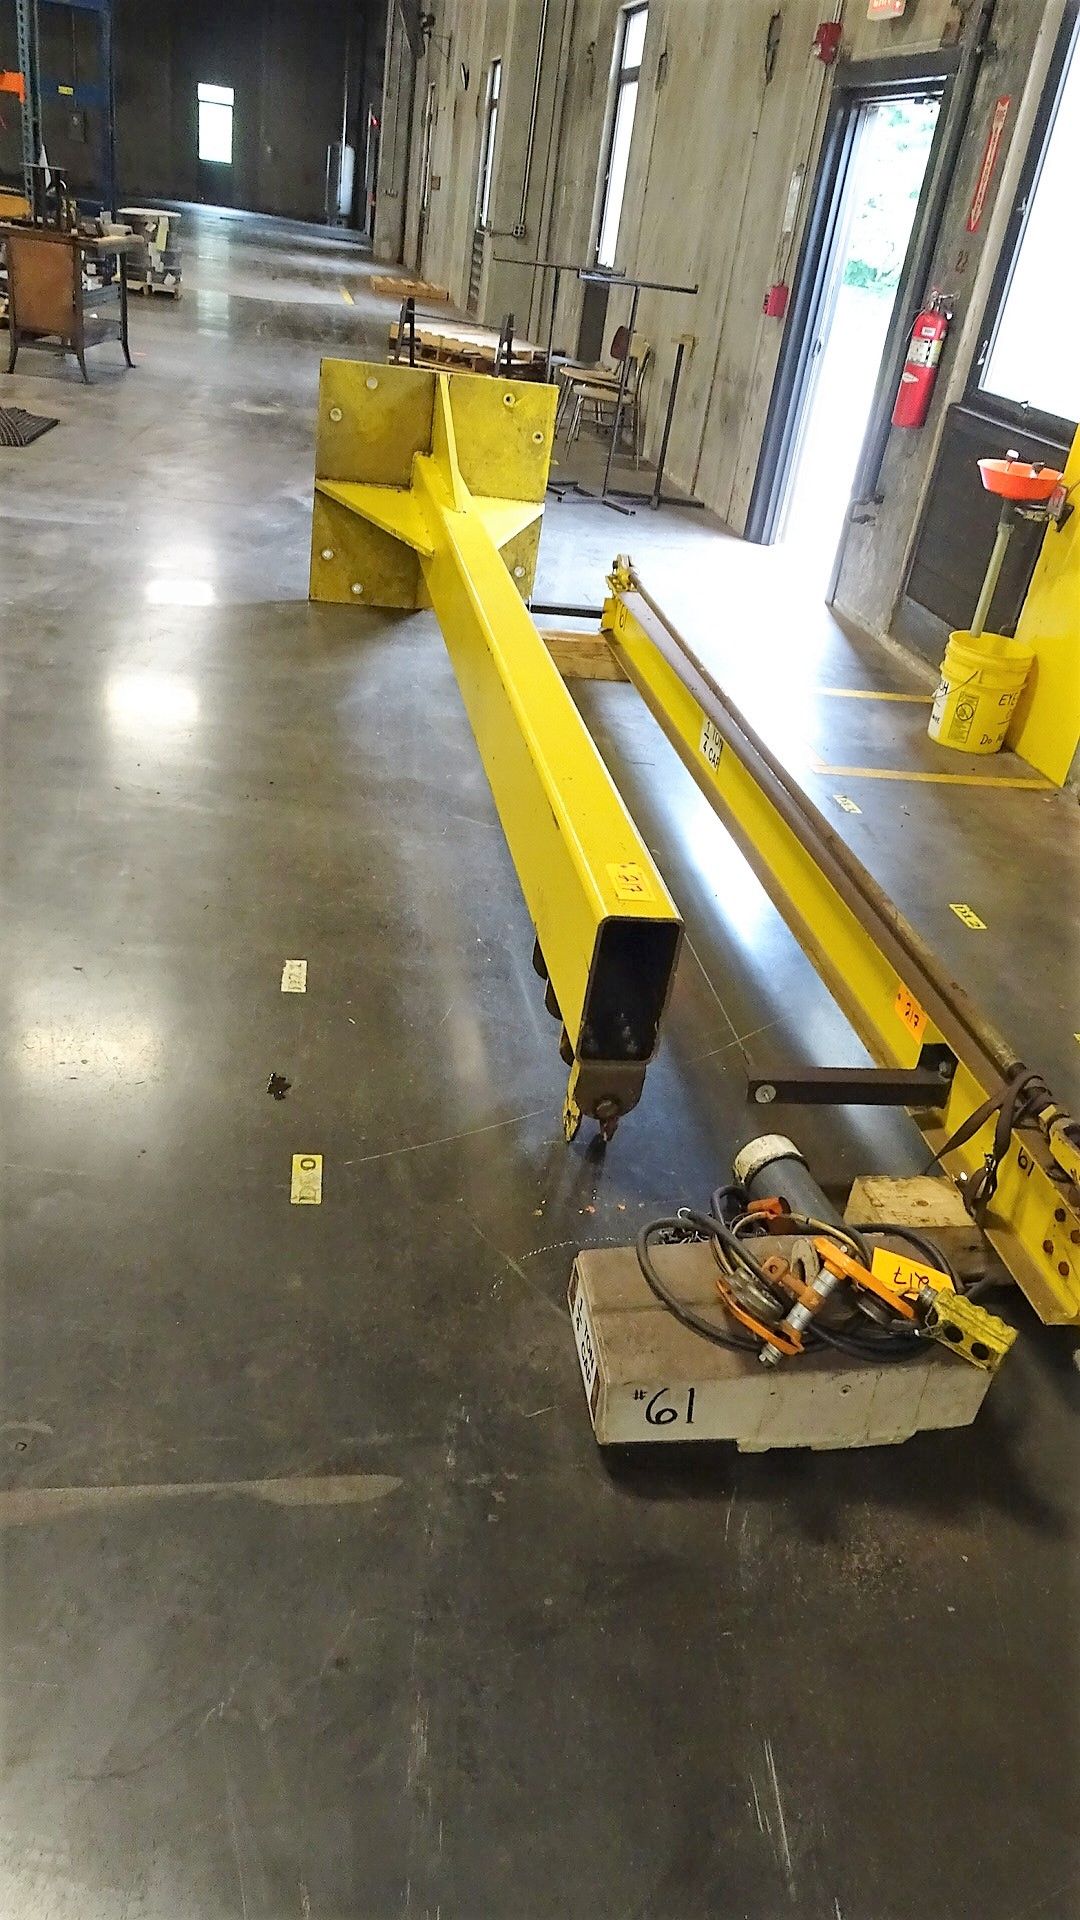 Free Standing Jib Crane with Approx 12' Column, 10' Swing Arm & Coffing 1/2-Ton Electric Chain